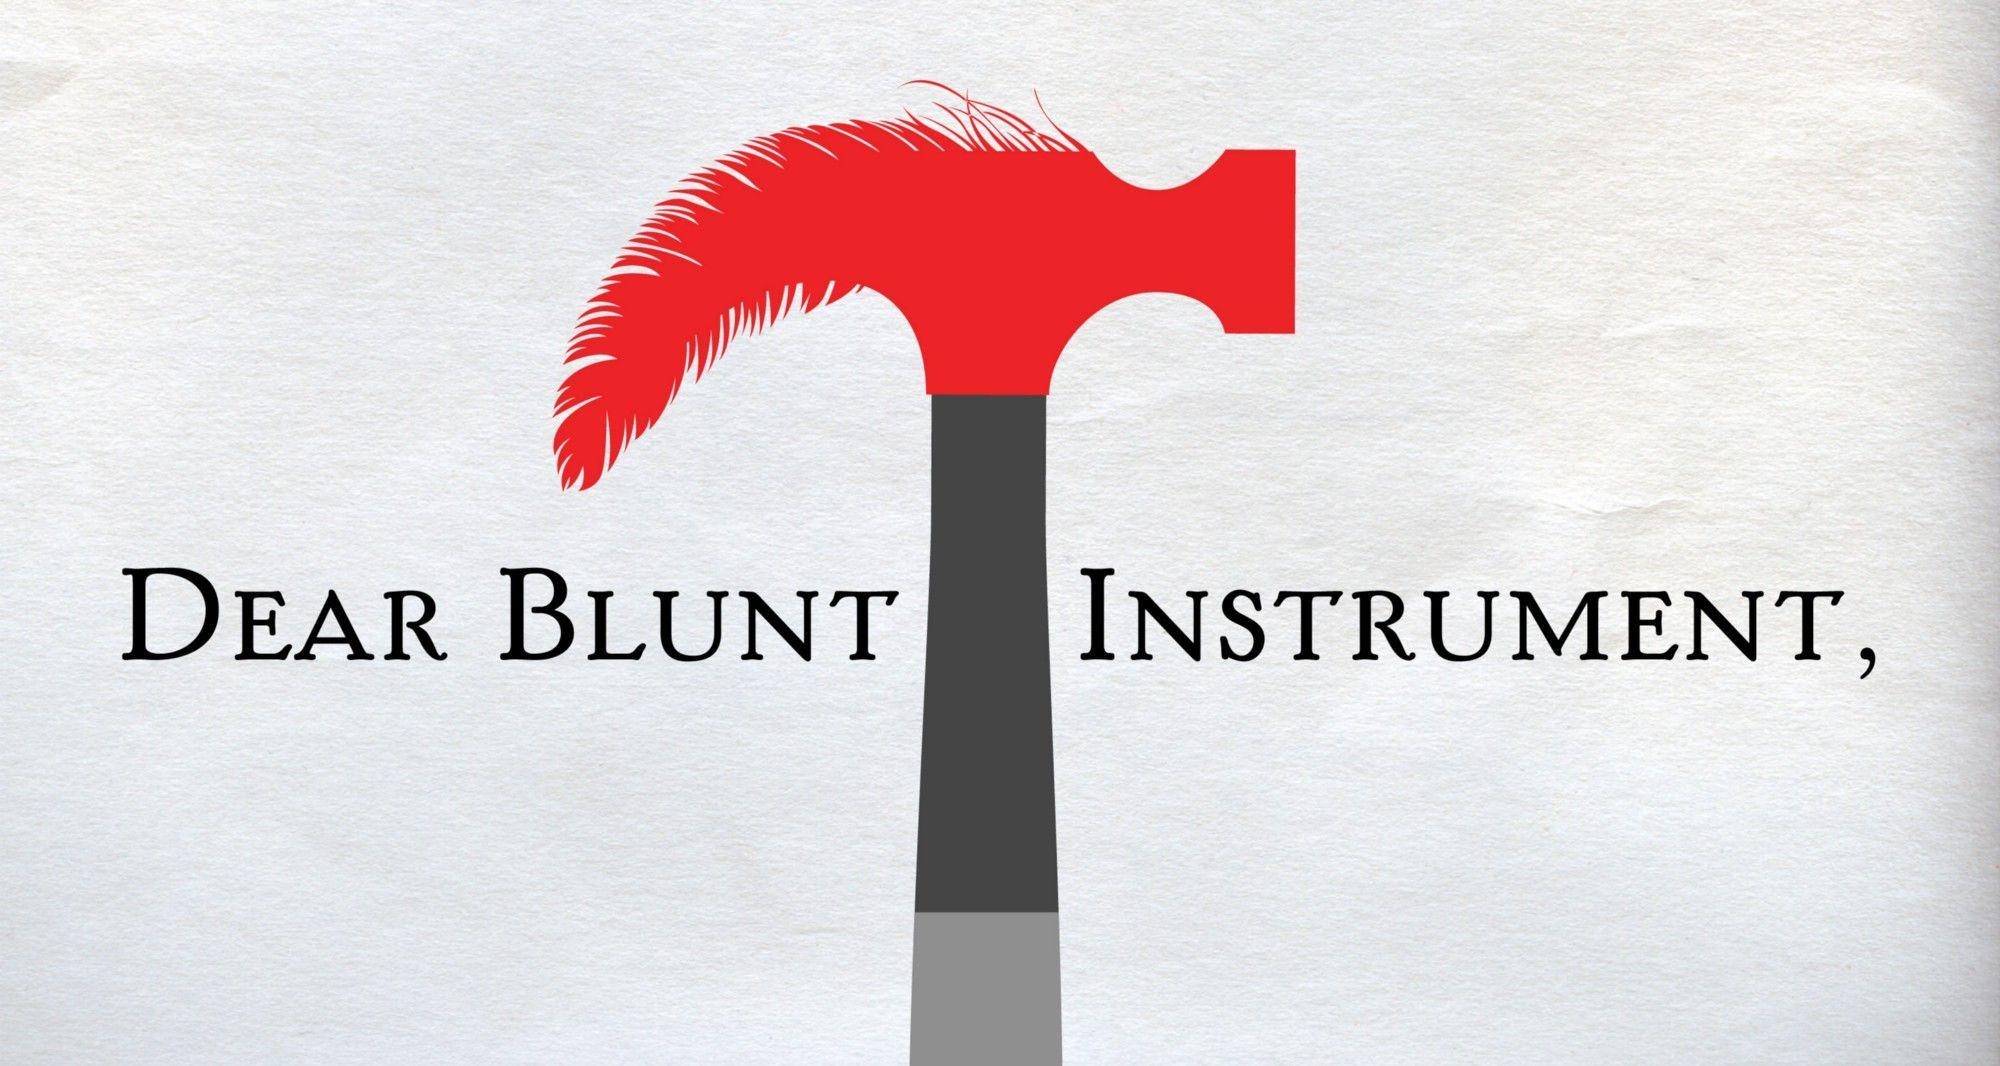 Poppy Books Logo - How Do You Know When Your Book Is Finished?: The Blunt Instrument on ...